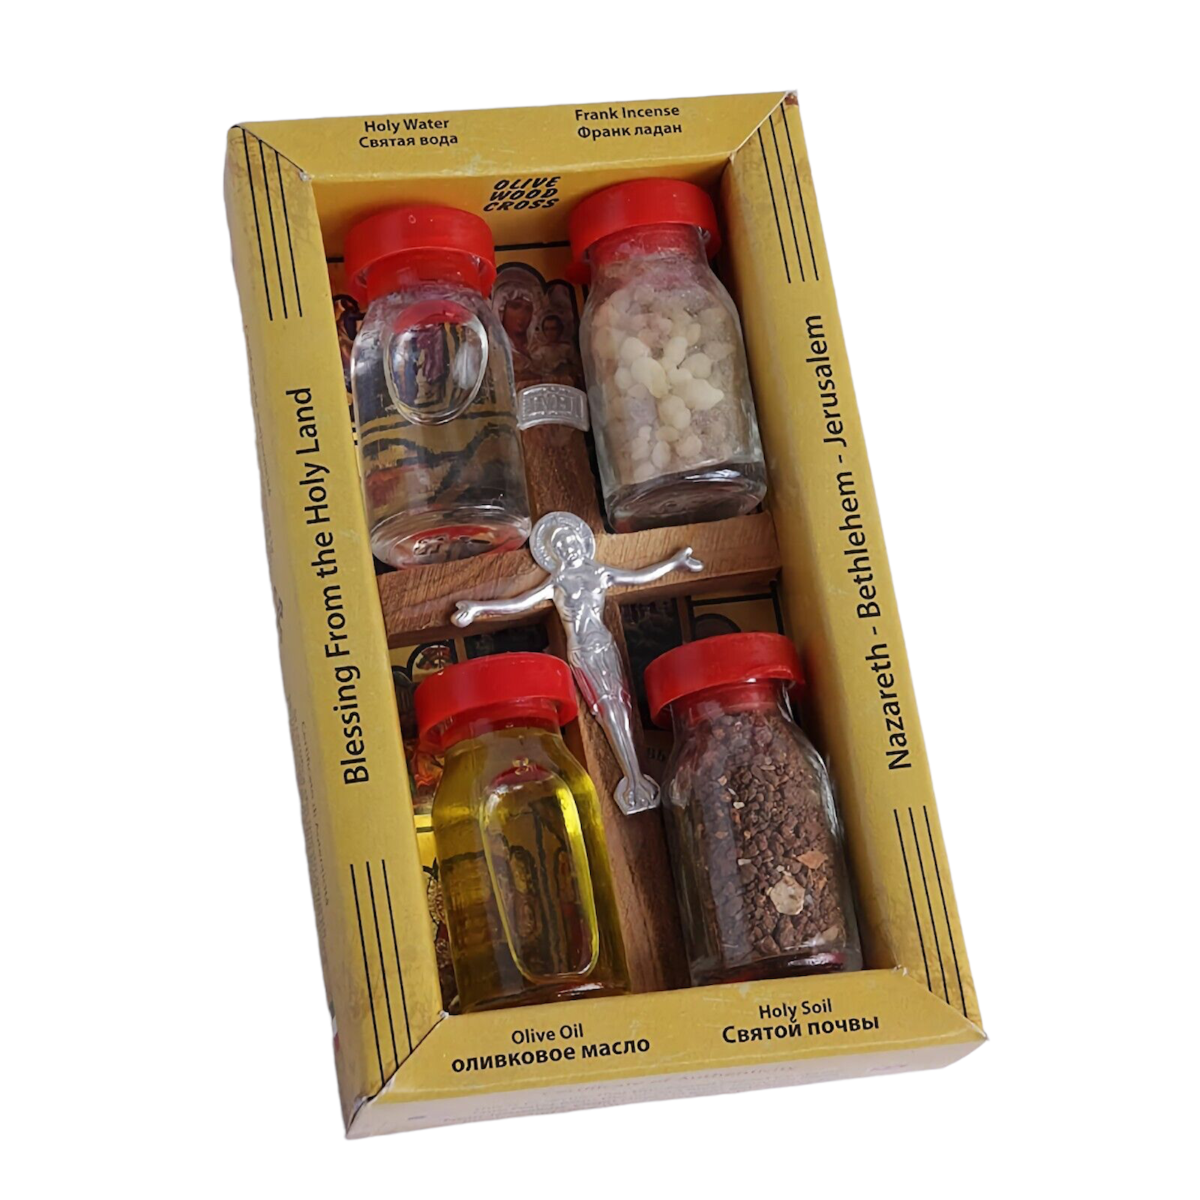 Home Small Blessing Kit Bottles and Cross From Holy Land Jerusalem